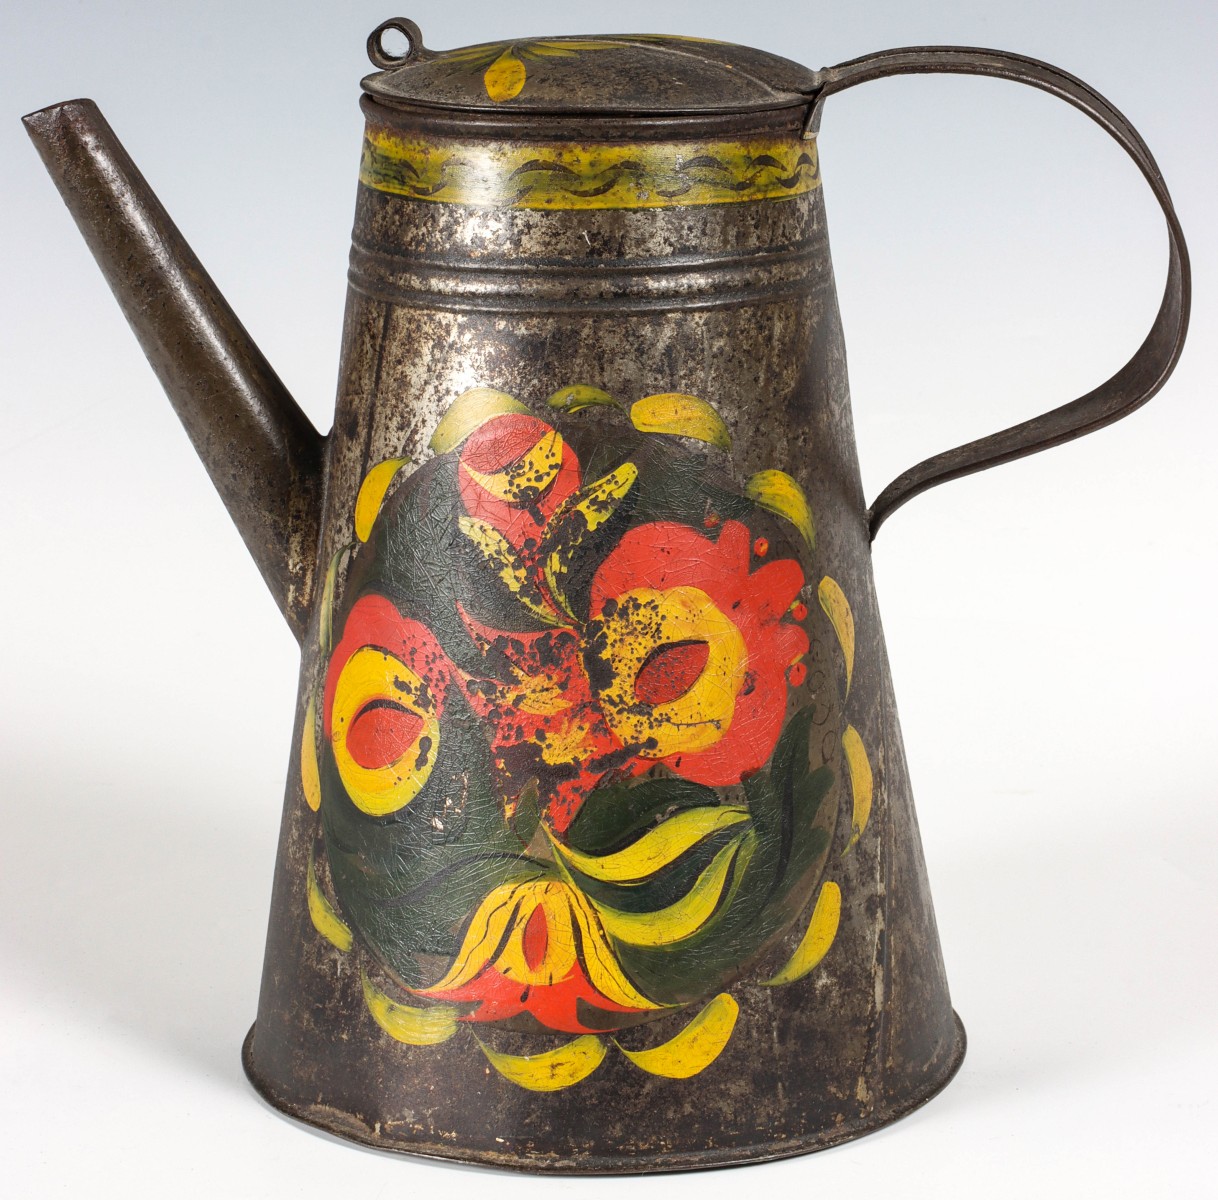 AN EARLY 19TH C. PENNSYLVANIA TOLE WARE COFFEE POT